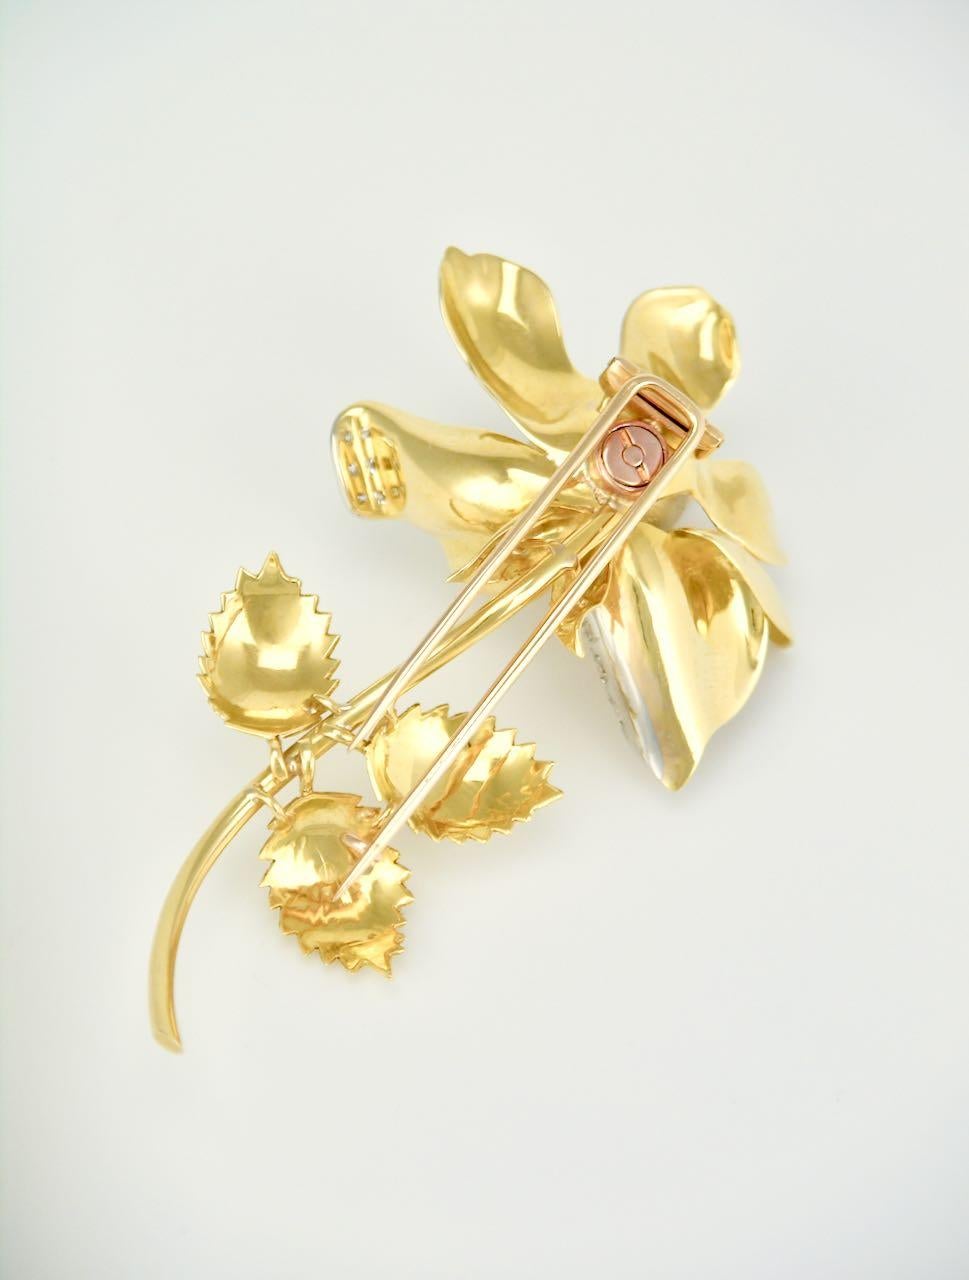 A beautifully realised pin in the form of a realistic rose shape with open petals with the tips decorated in diamonds. The yellow gold is textured with a brushed finish to the flower and leaves, and then contrasted with a polished finish to the stem